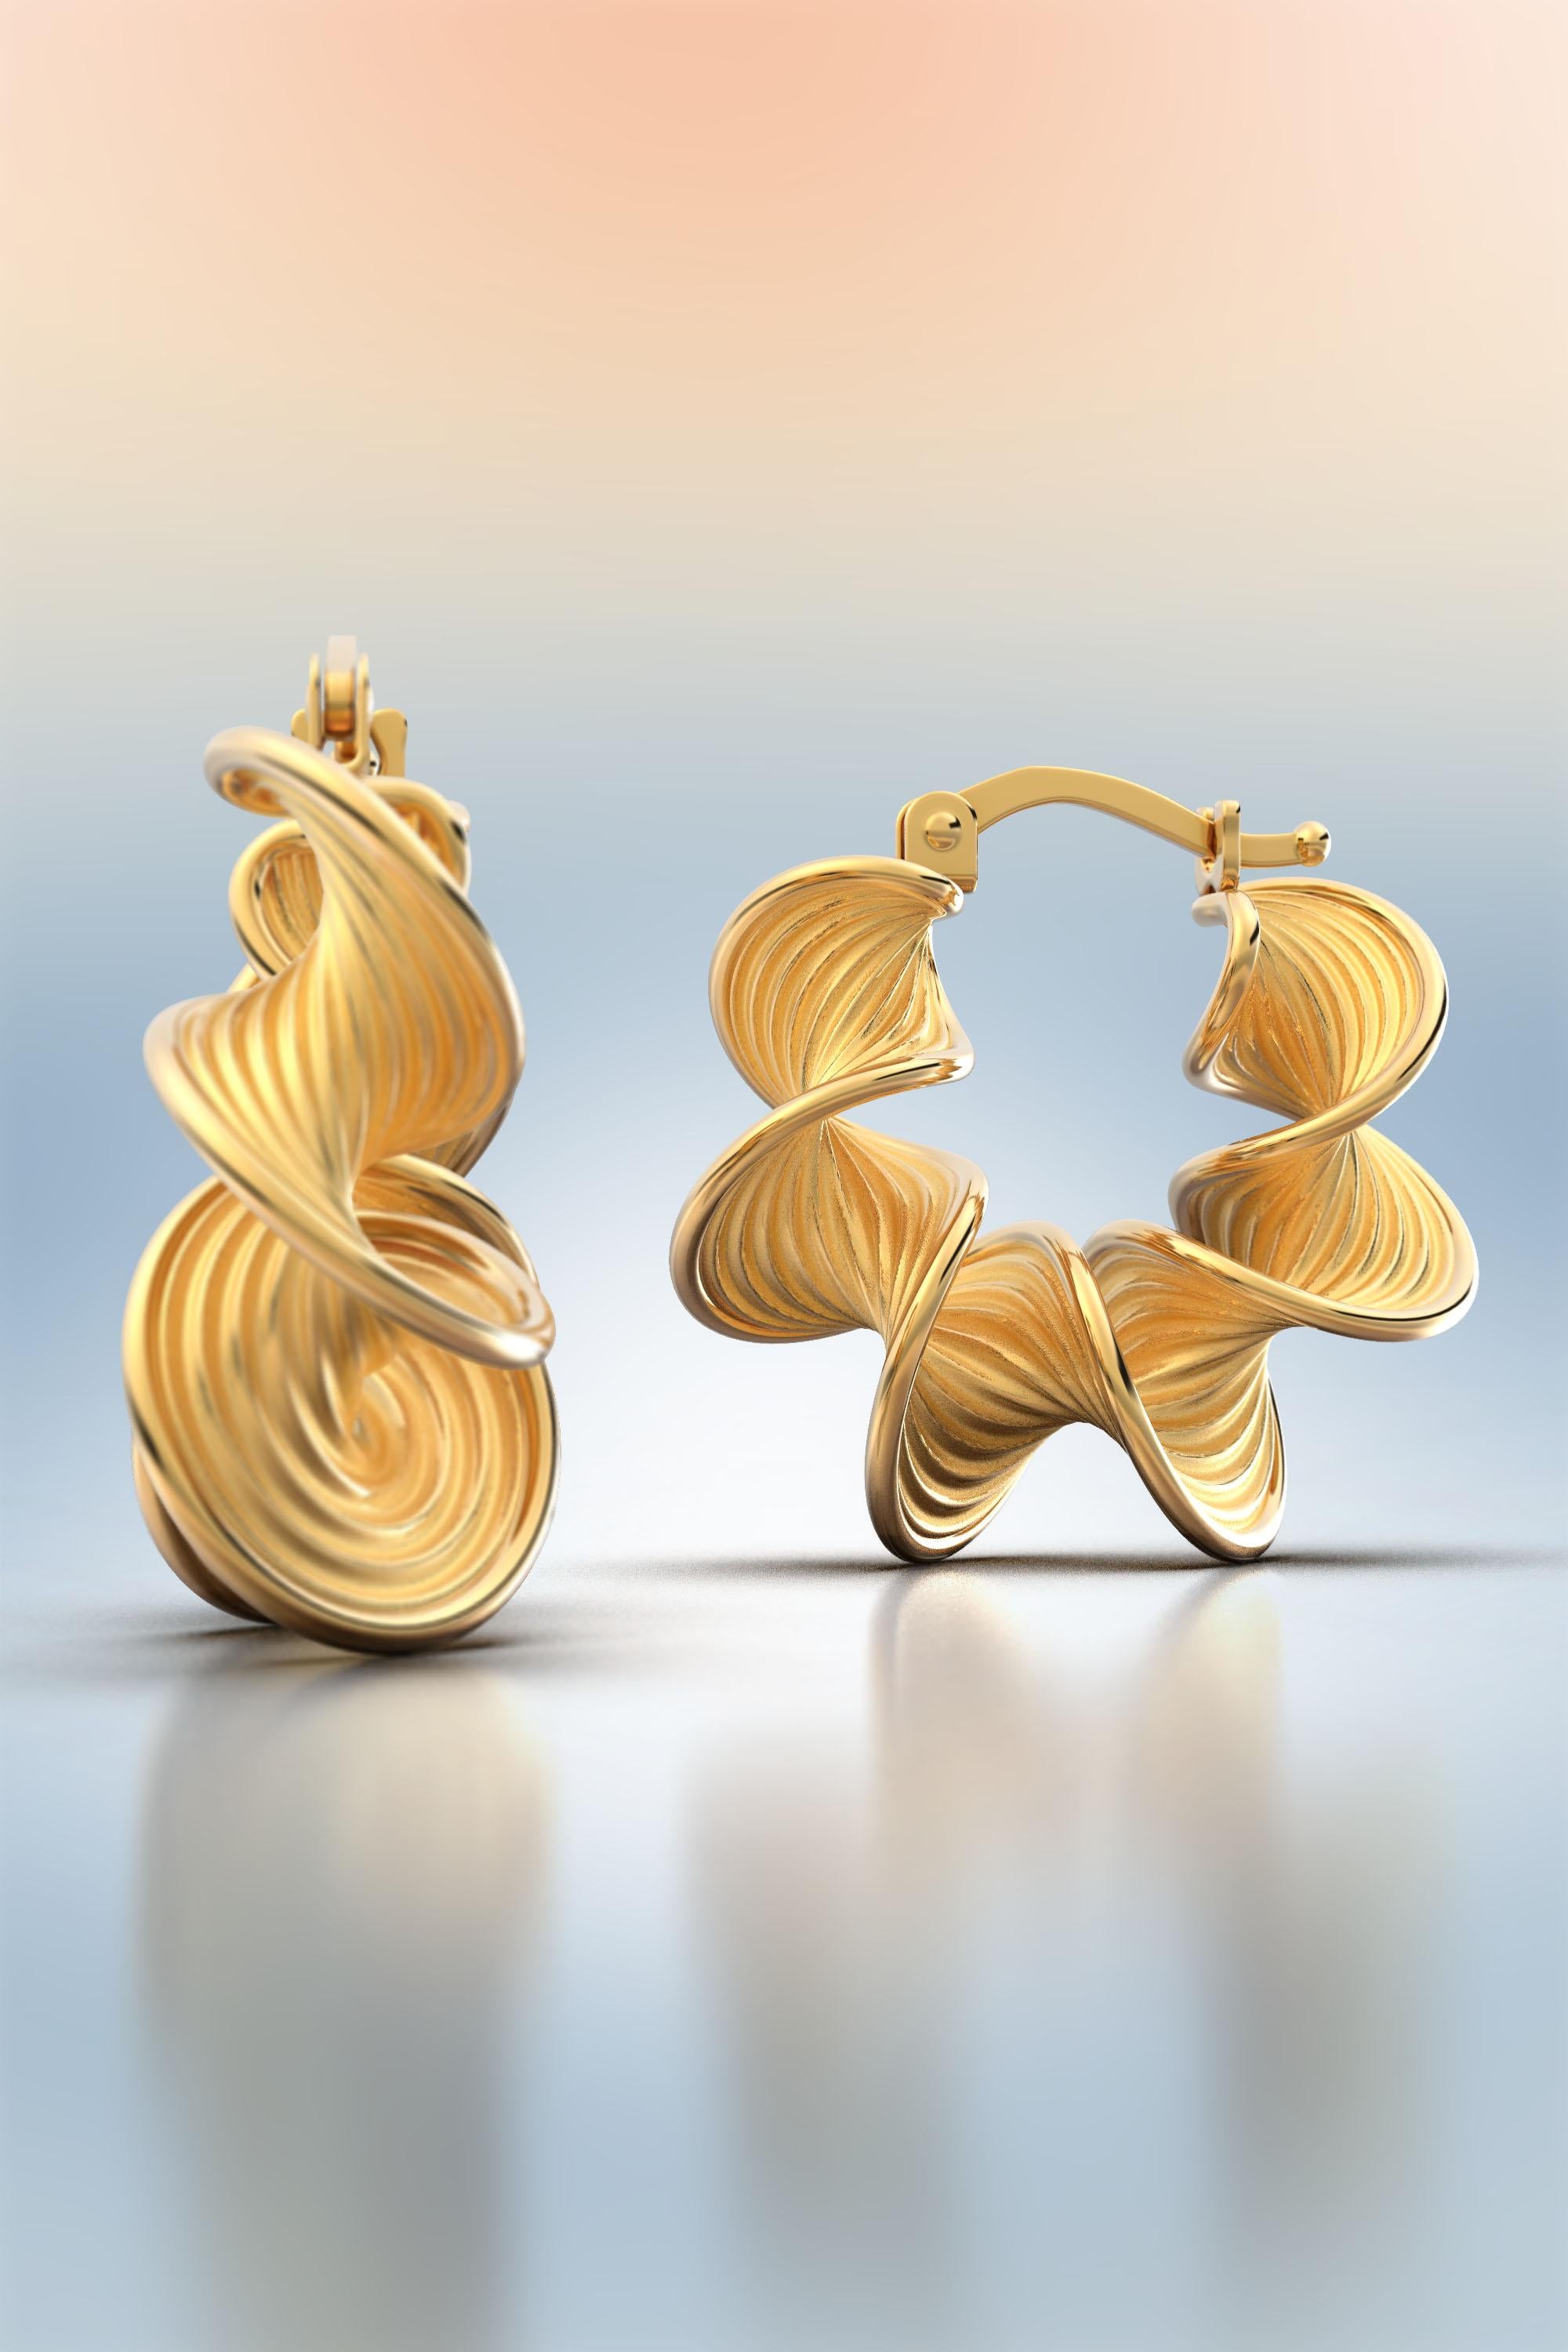 Contemporary 14k Twisted Gold Hoop Earrings Designed and Crafted in Italy For Sale